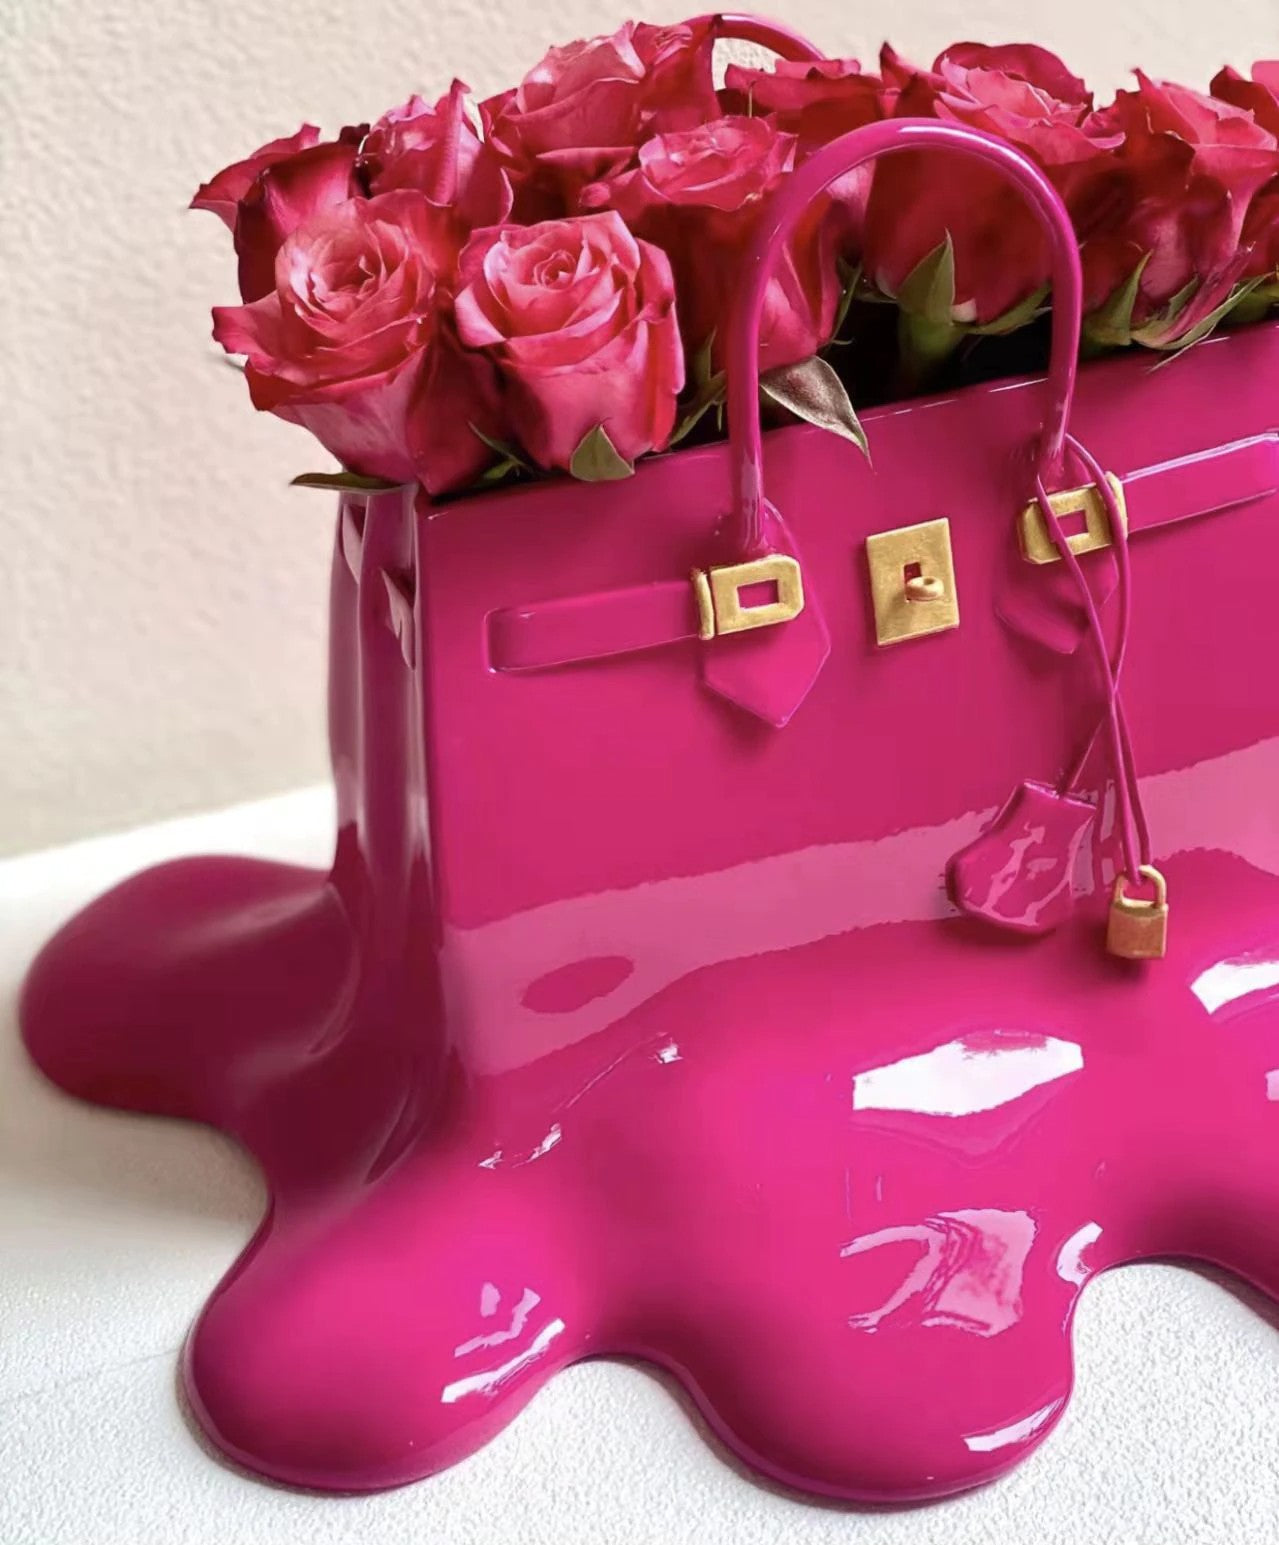 A close up view of a pink colored resin vase which looks like a melting designer women’s handbag. The vase is filled with pink roses.